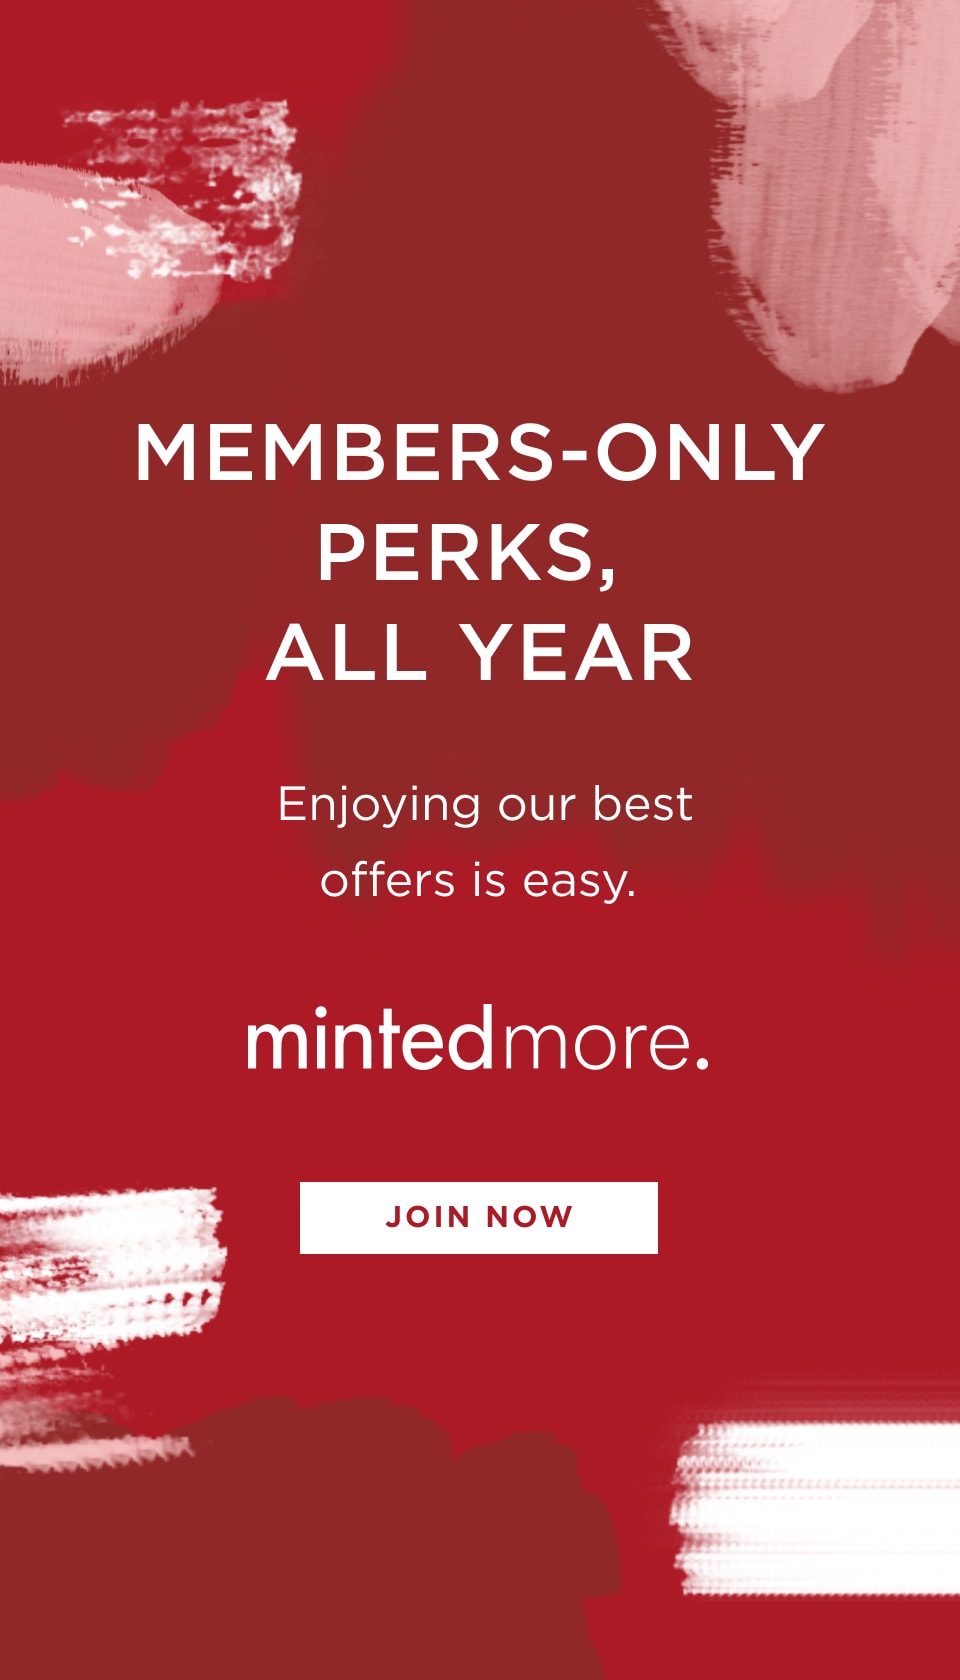 Join Minted More